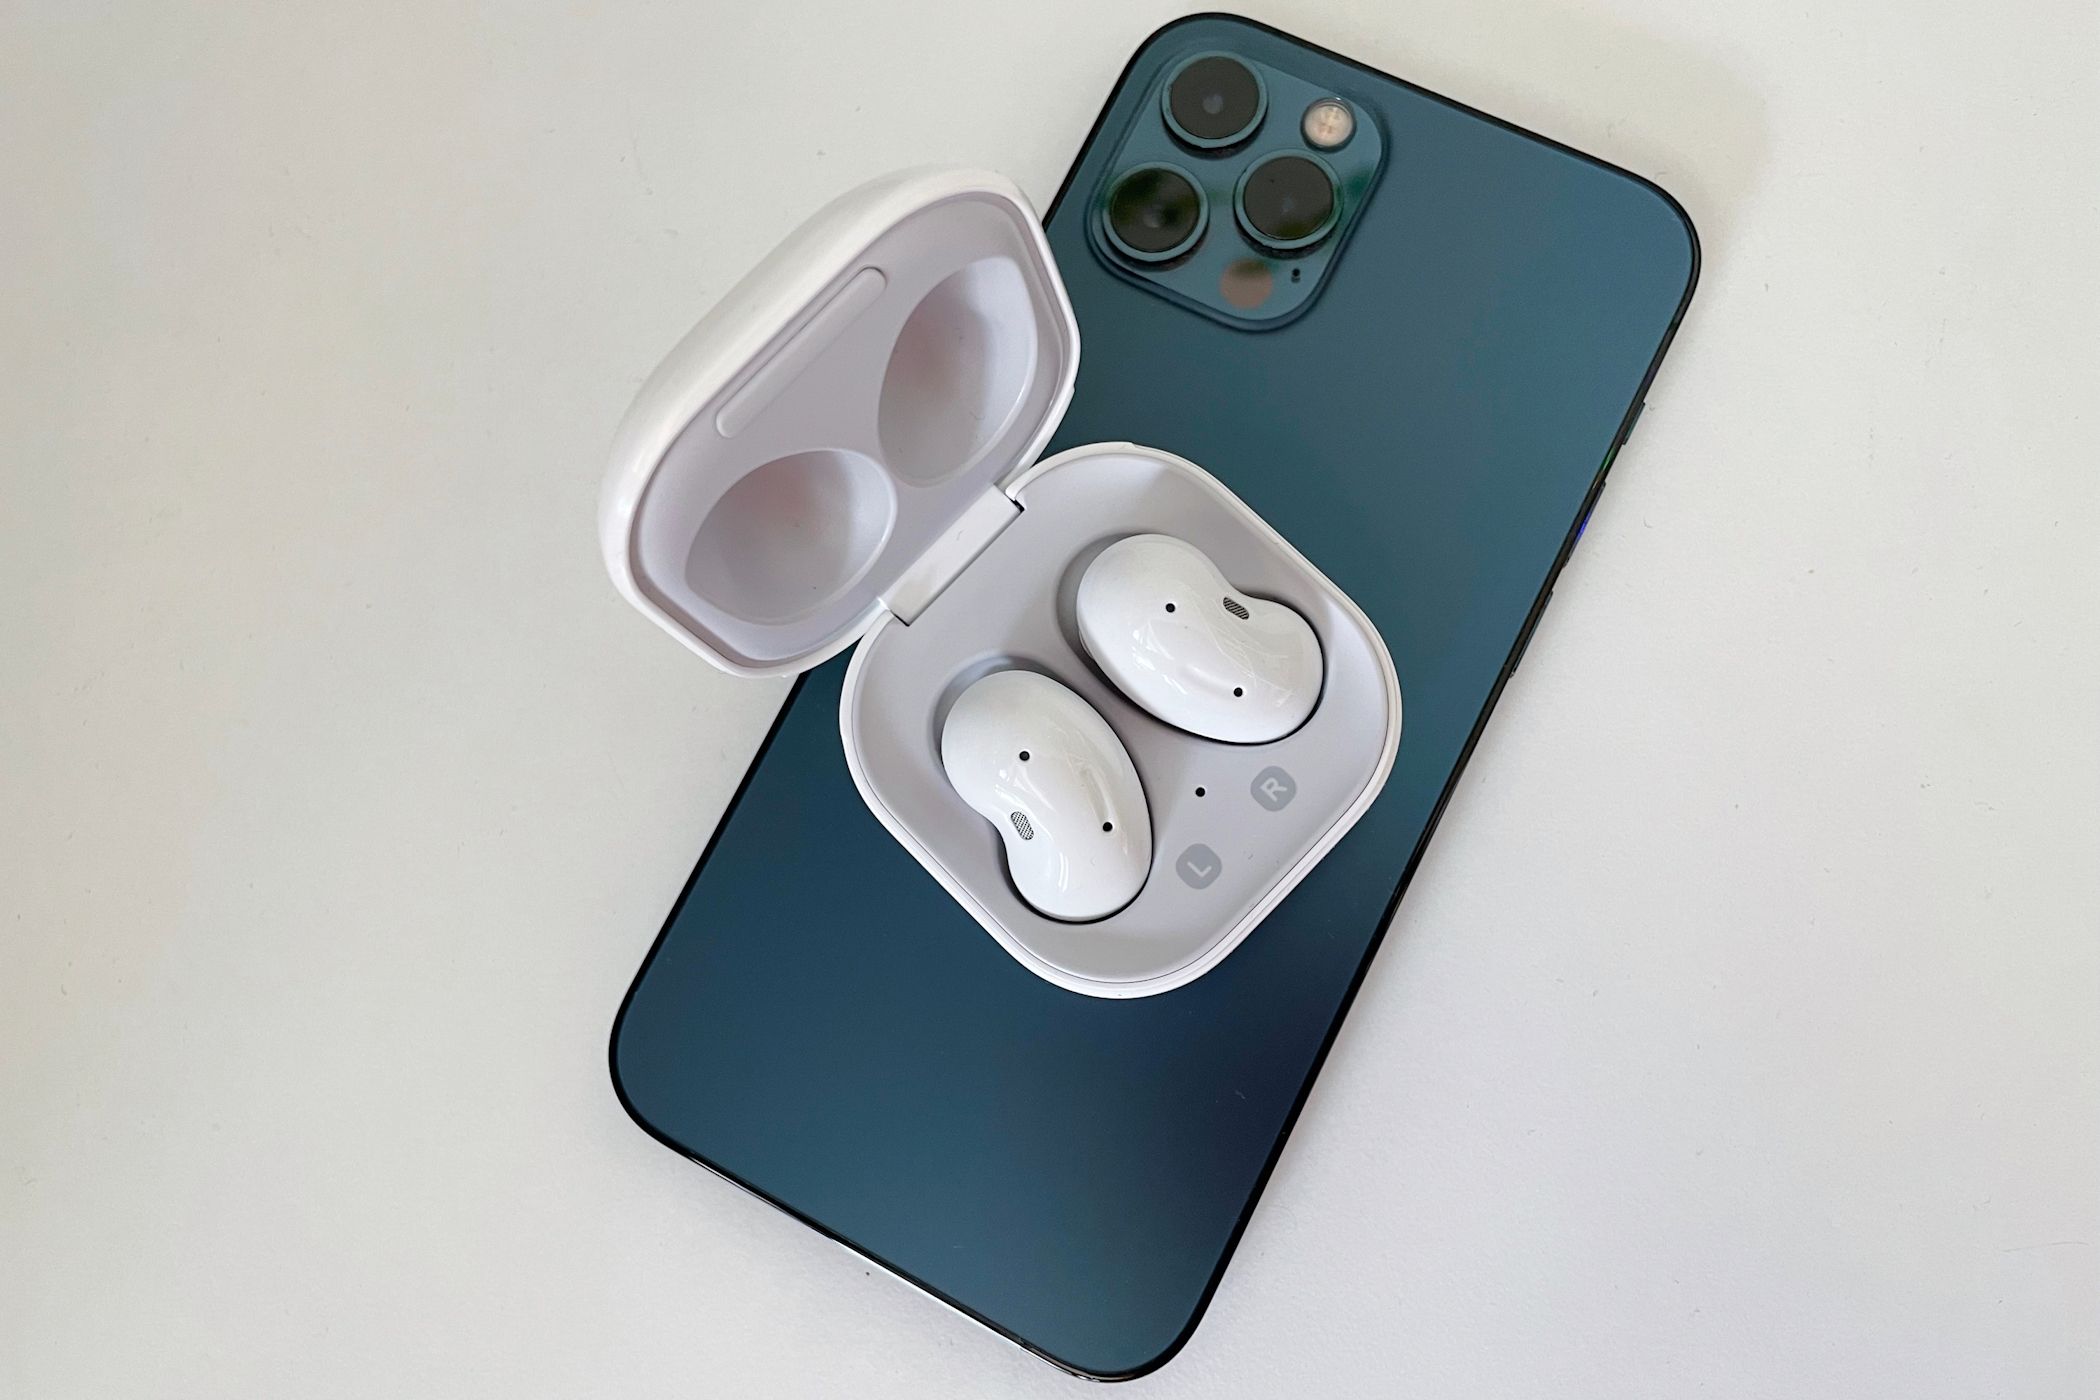 Galaxy Buds in a charging case on top of an iPhone